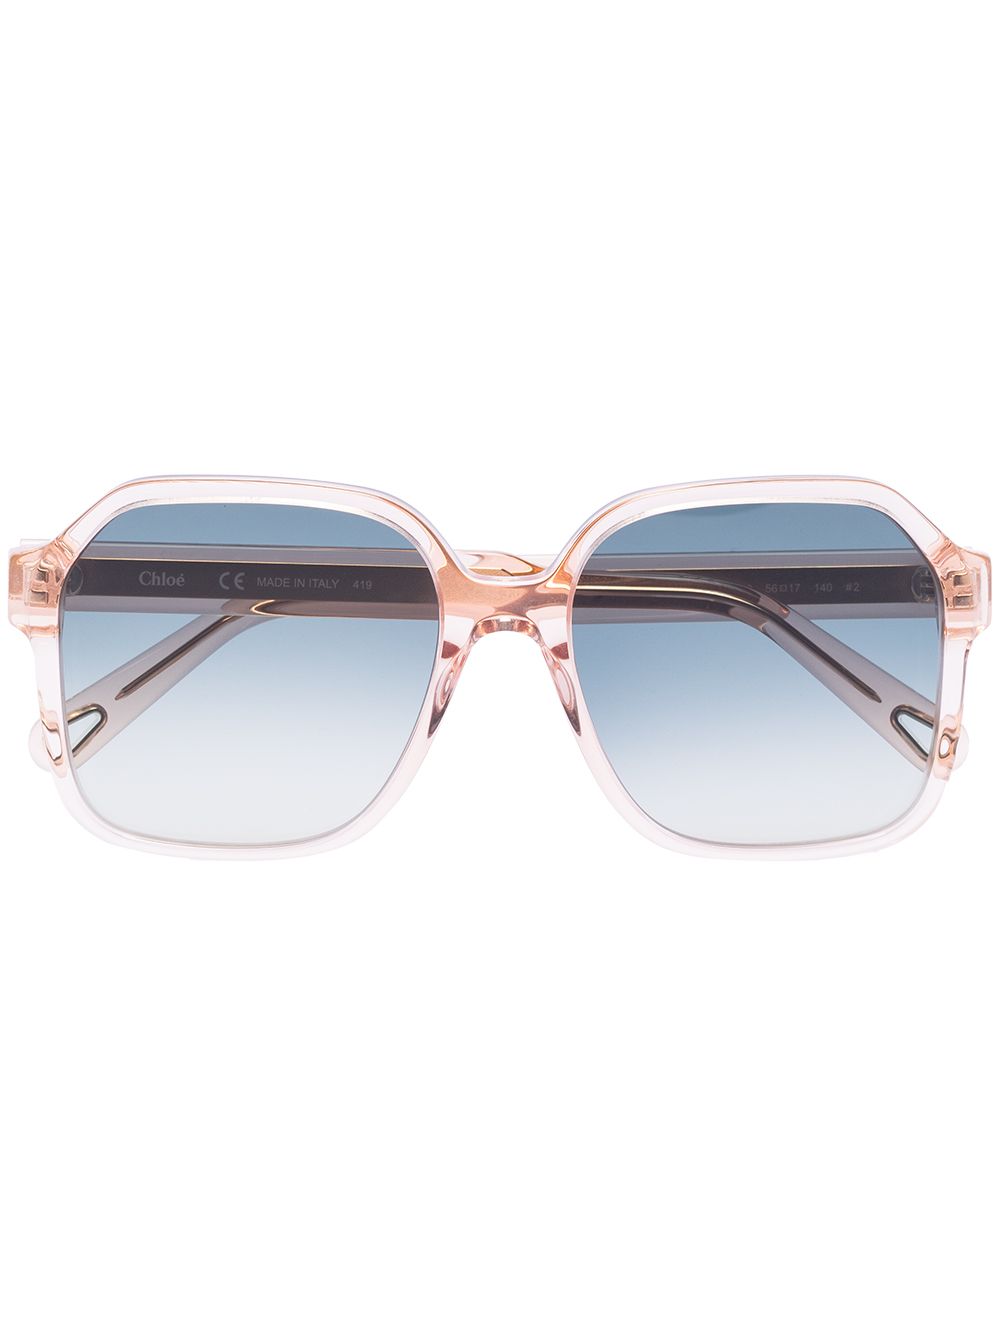 Image 1 of Chloé Eyewear Willow square-frame sunglasses